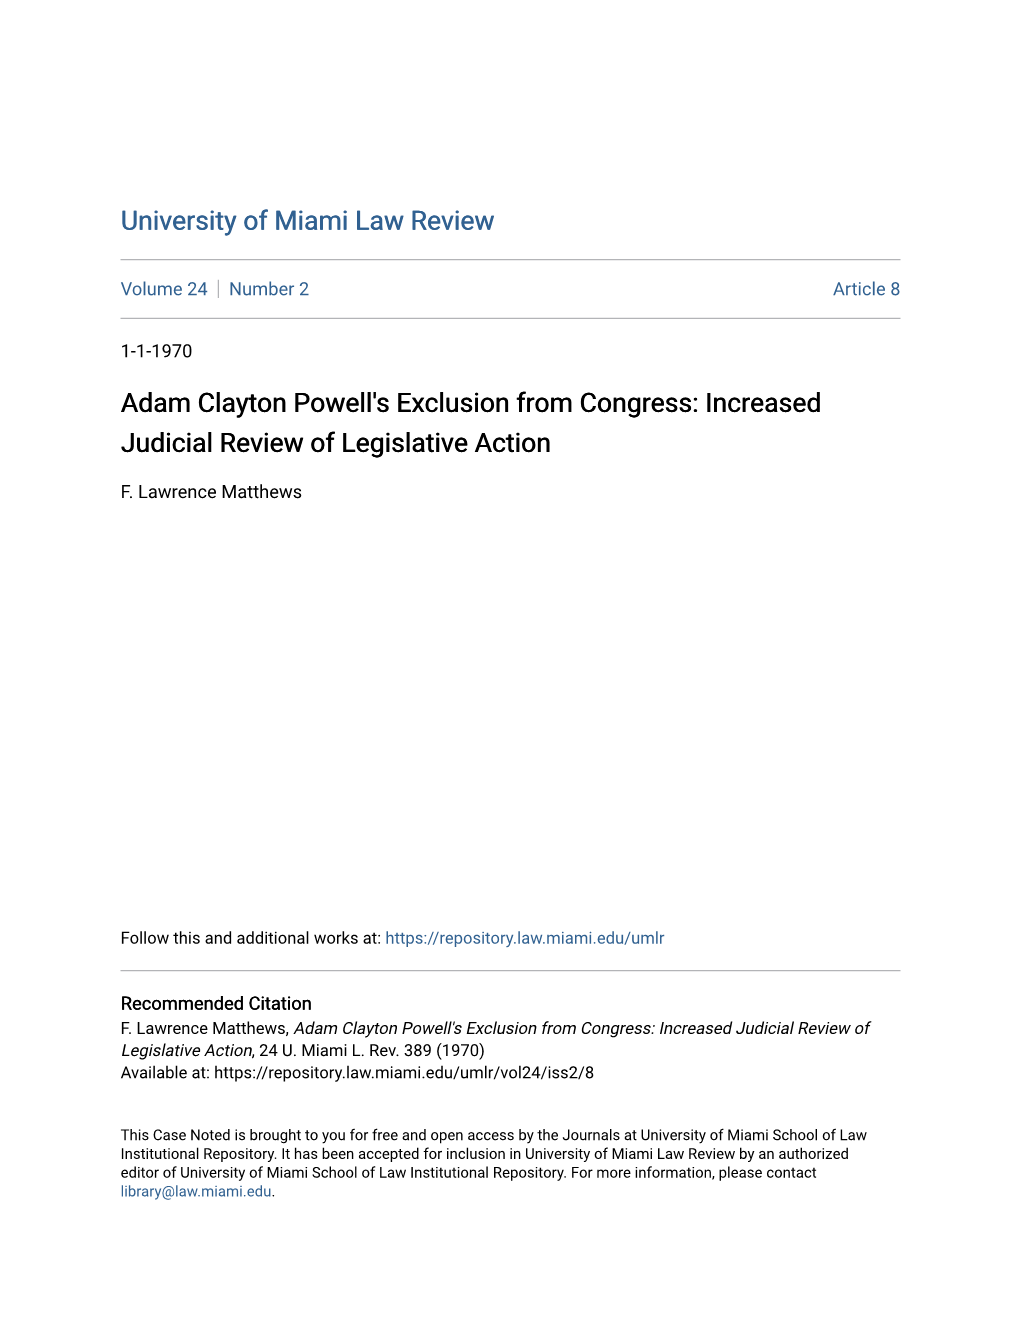 Adam Clayton Powell's Exclusion from Congress: Increased Judicial Review of Legislative Action